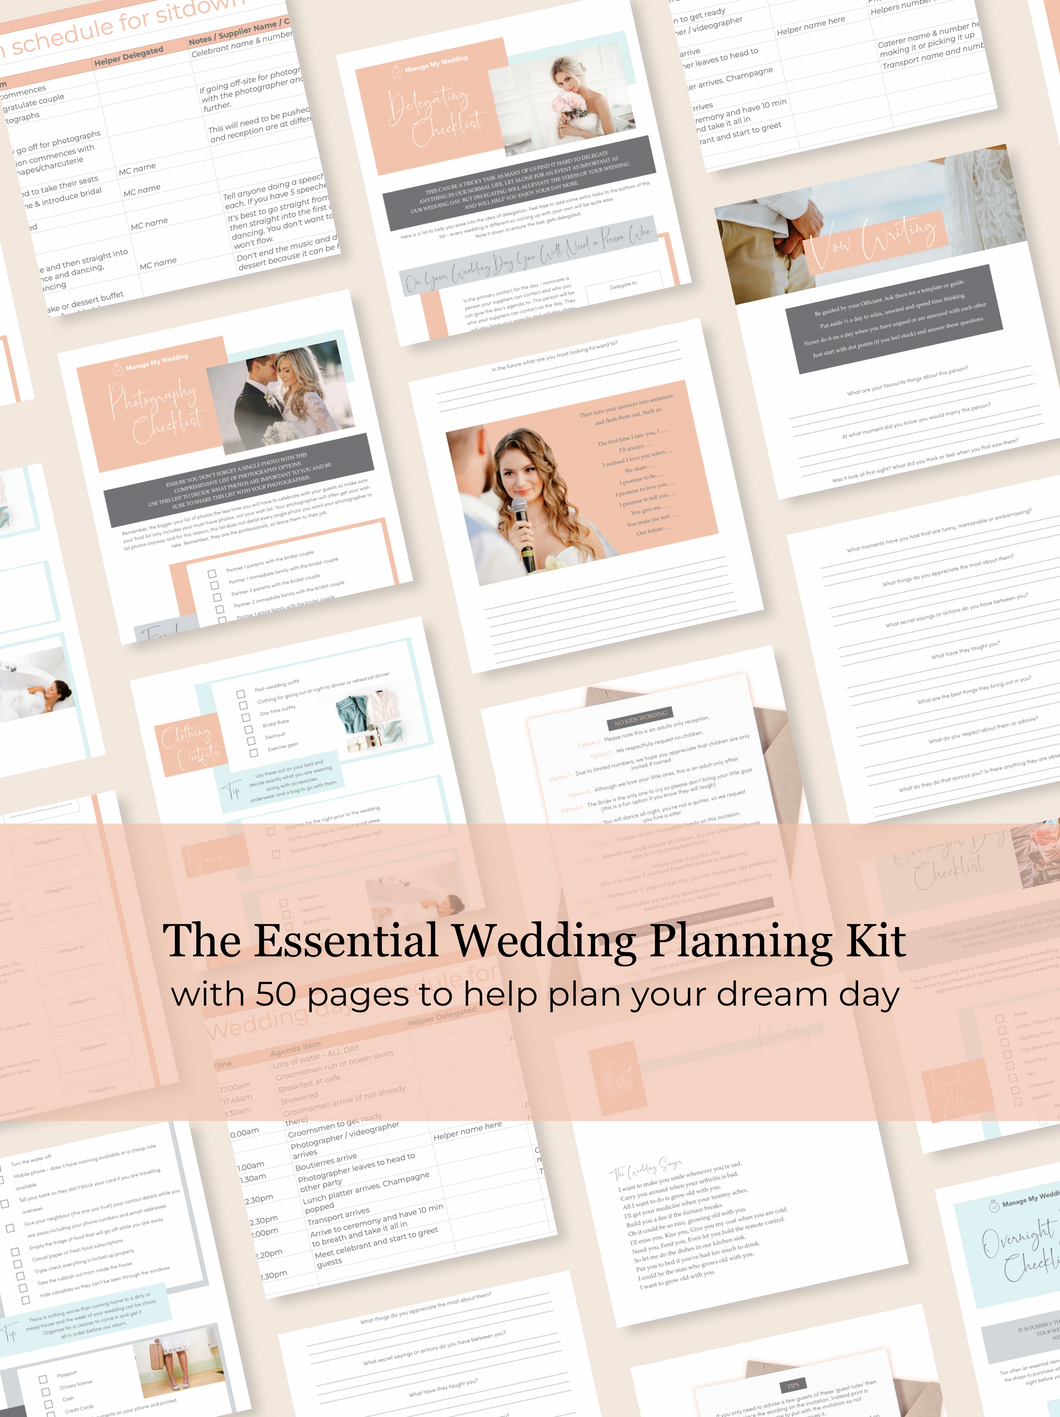 Over 50 pages to help you plan your dream day. Expert templates and checklists for seamless organisation, elegant invite wording, heartfelt vows, captivating readings, and more.